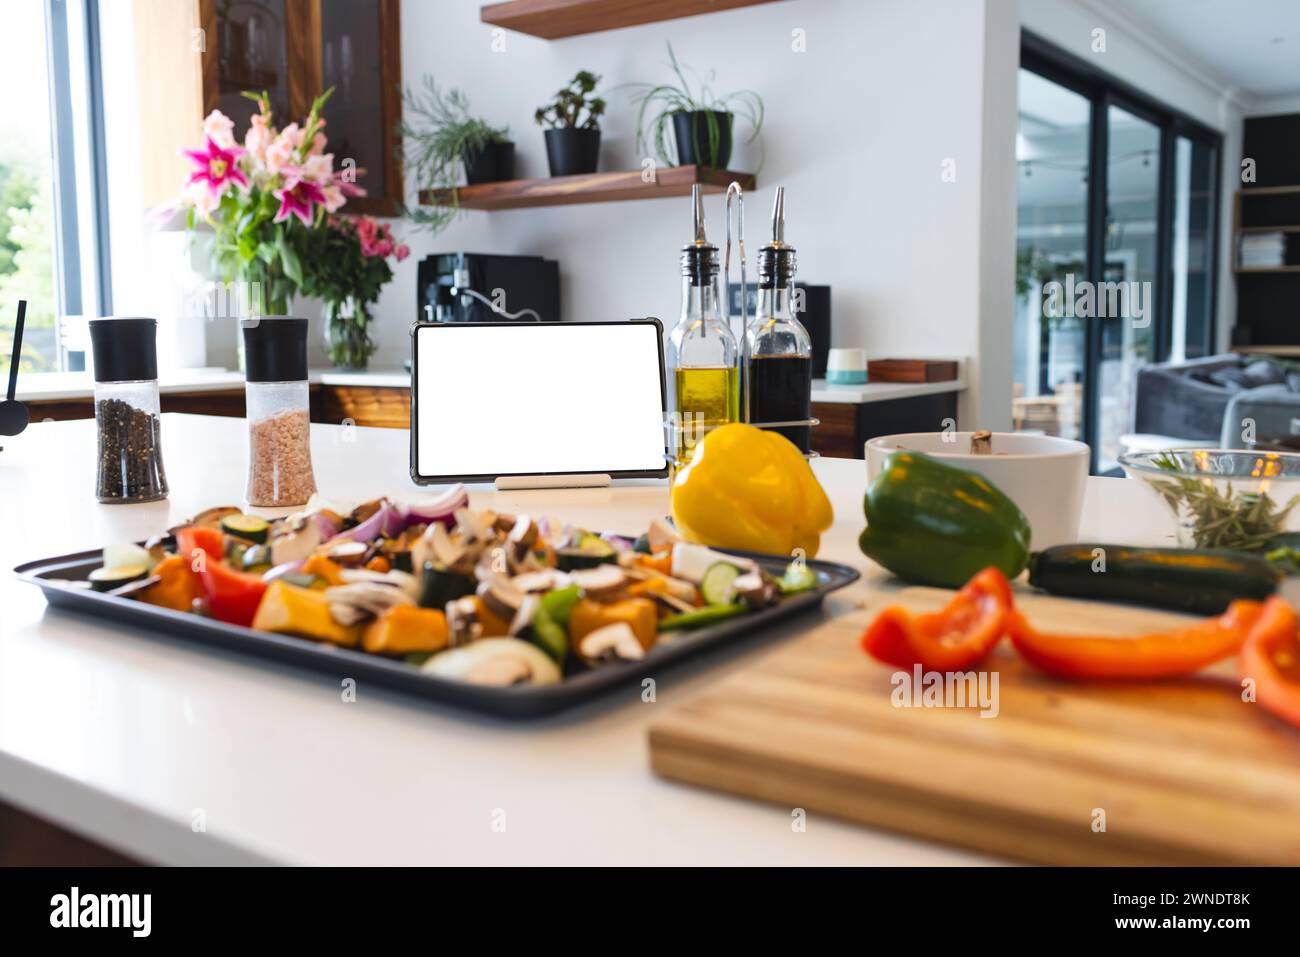 A tablet with a blank screen stands among various cooking ingredients on a kitchen counter Stock Photo